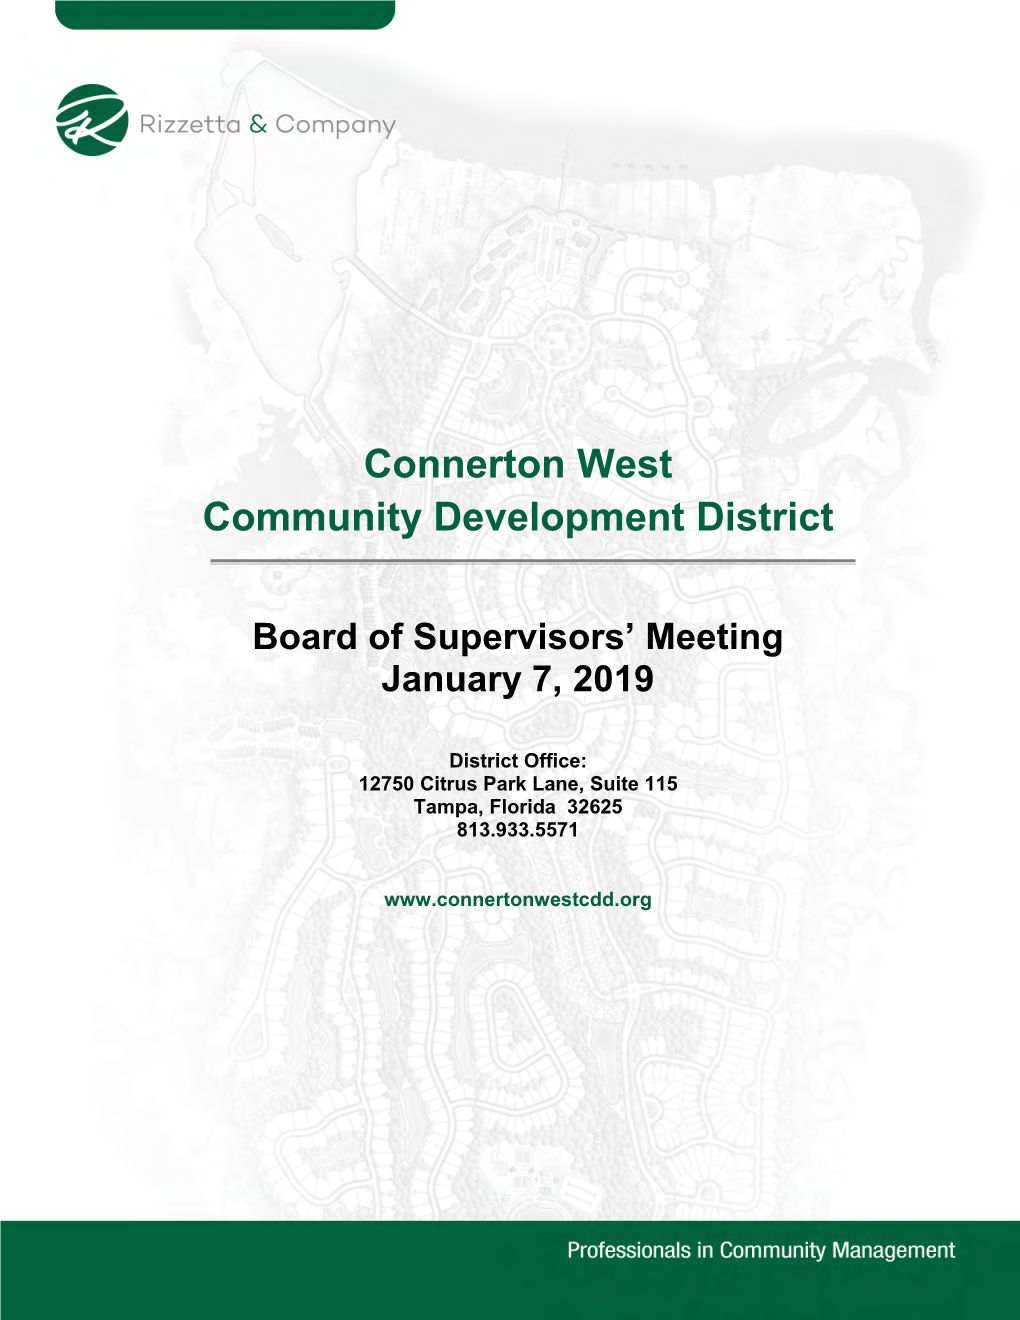 Board of Supervisors' Meeting January 7, 2019